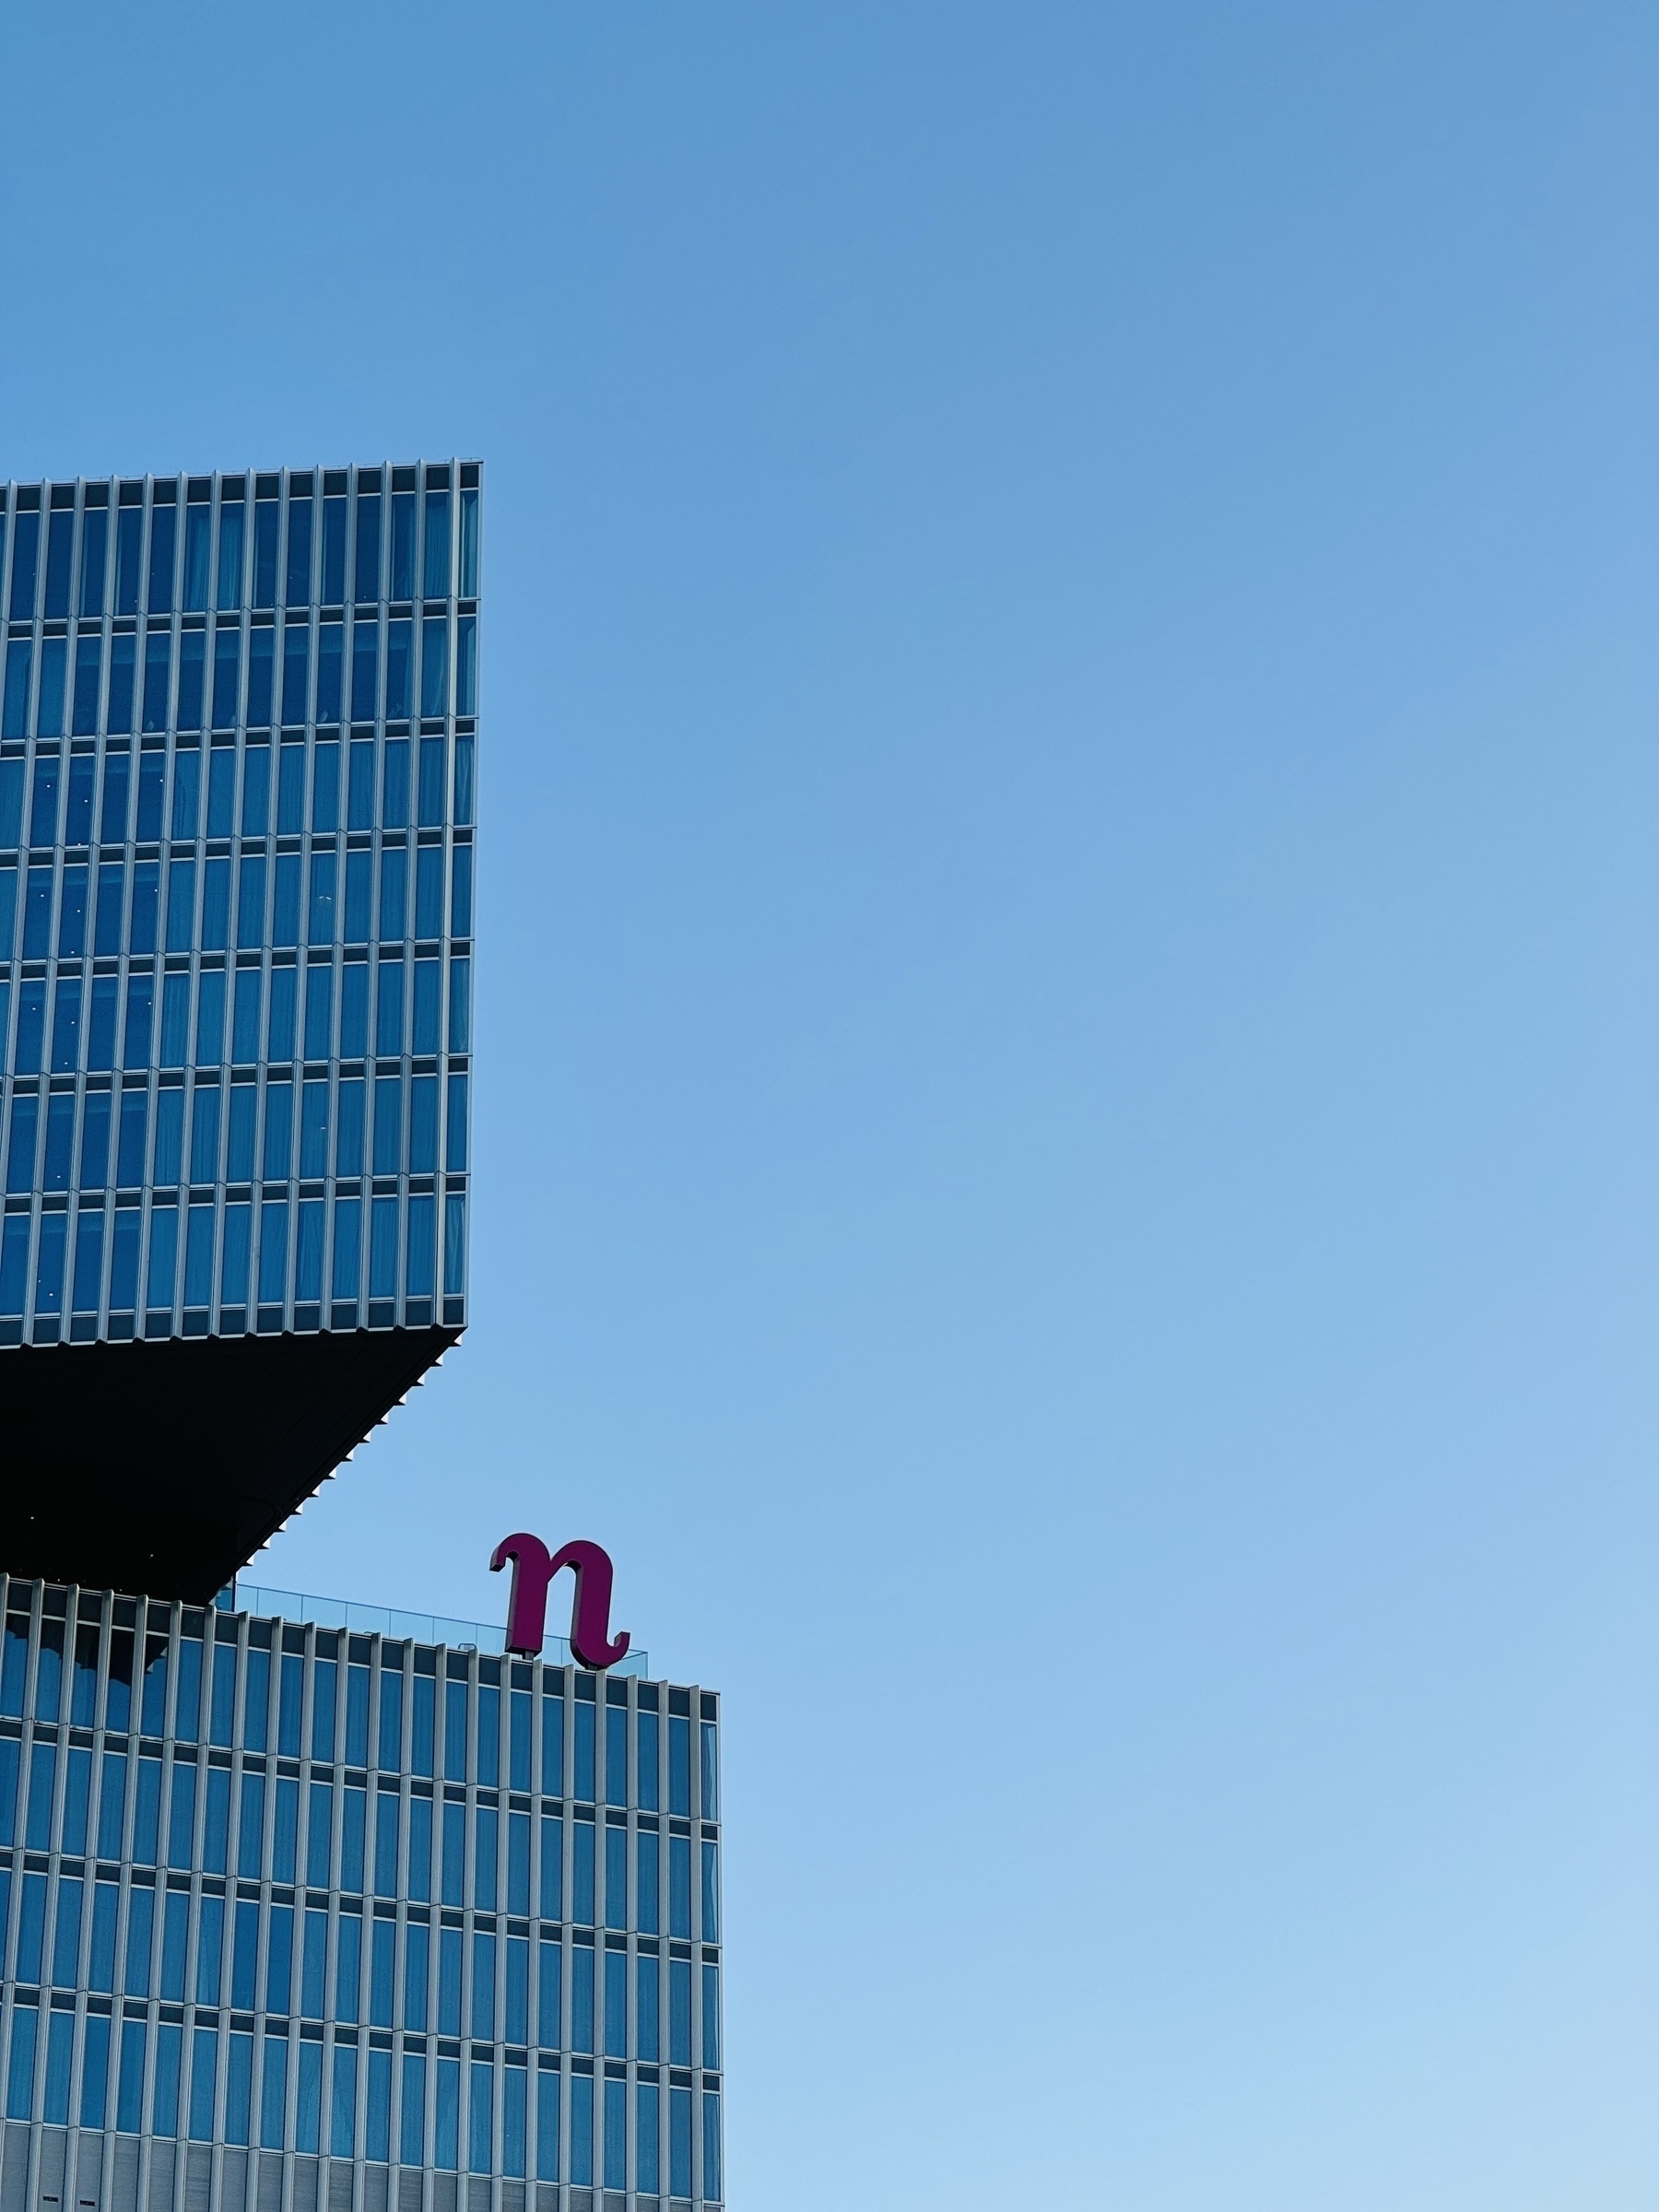 A pointy glass building with a “n” sign on it, against a clear blue sky.